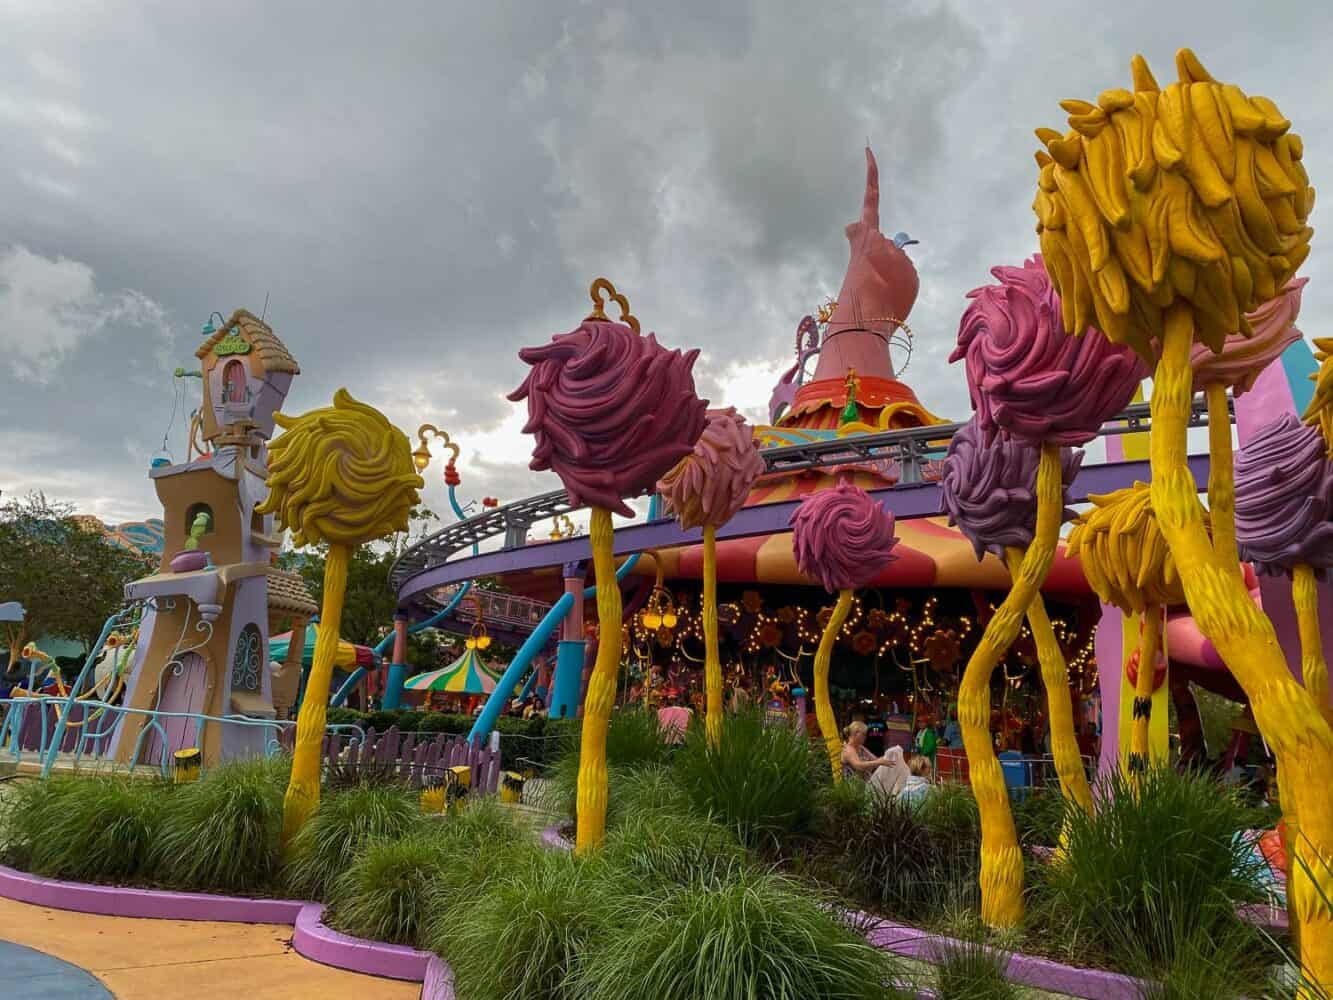 How To Have Fun At Universal's Islands Of Adventure (Tips From A